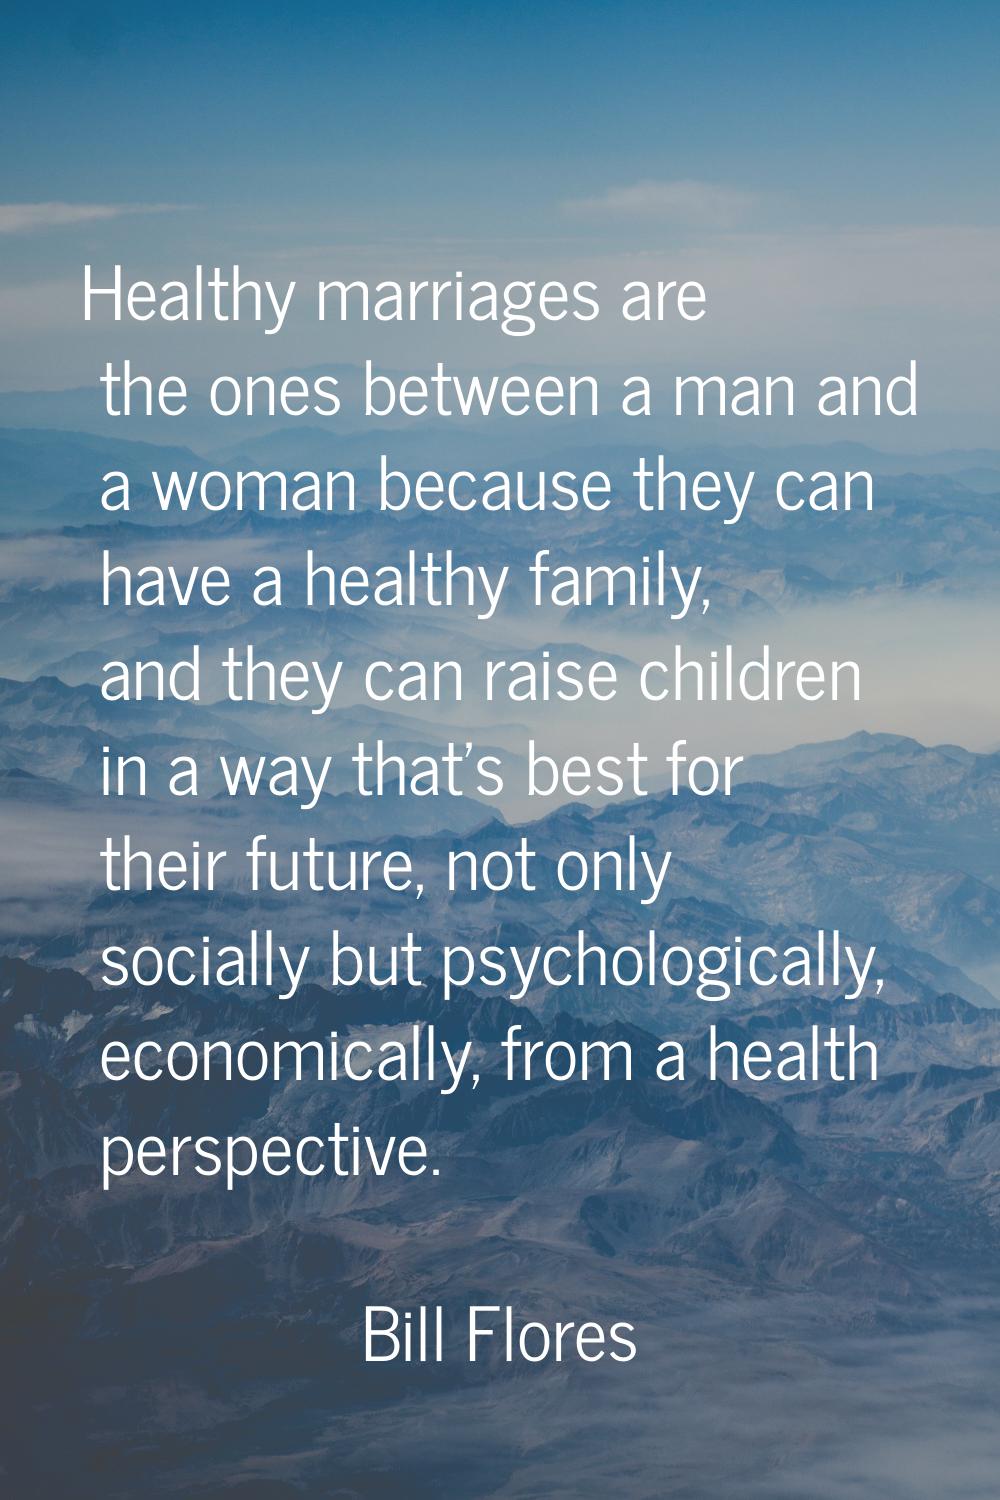 Healthy marriages are the ones between a man and a woman because they can have a healthy family, an